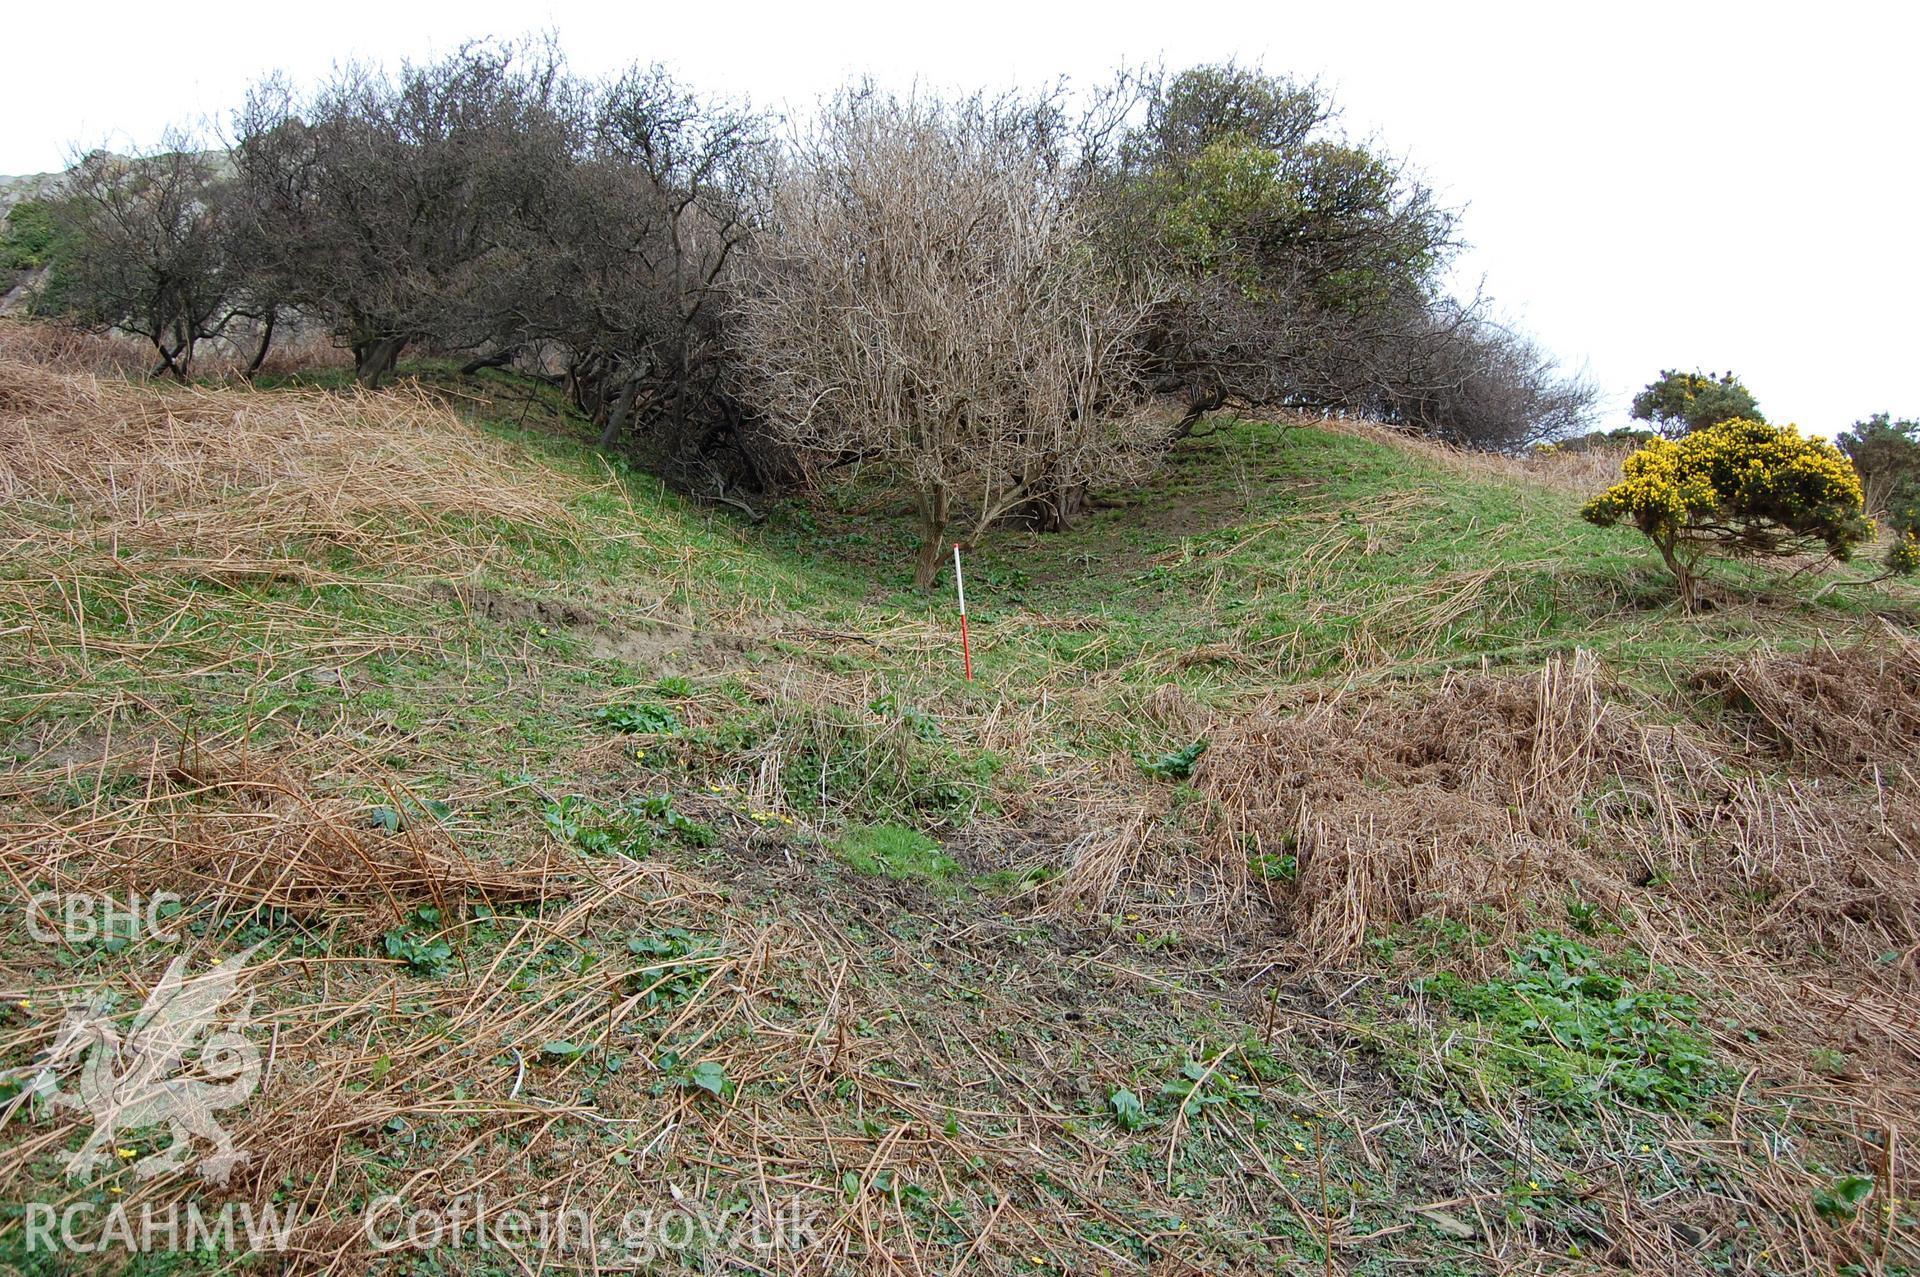 Digital photograph from an archaeological assessment of Deganwy Castle, carried out by Gwynedd Archaeological Trust, 2009. Incline up West hill.